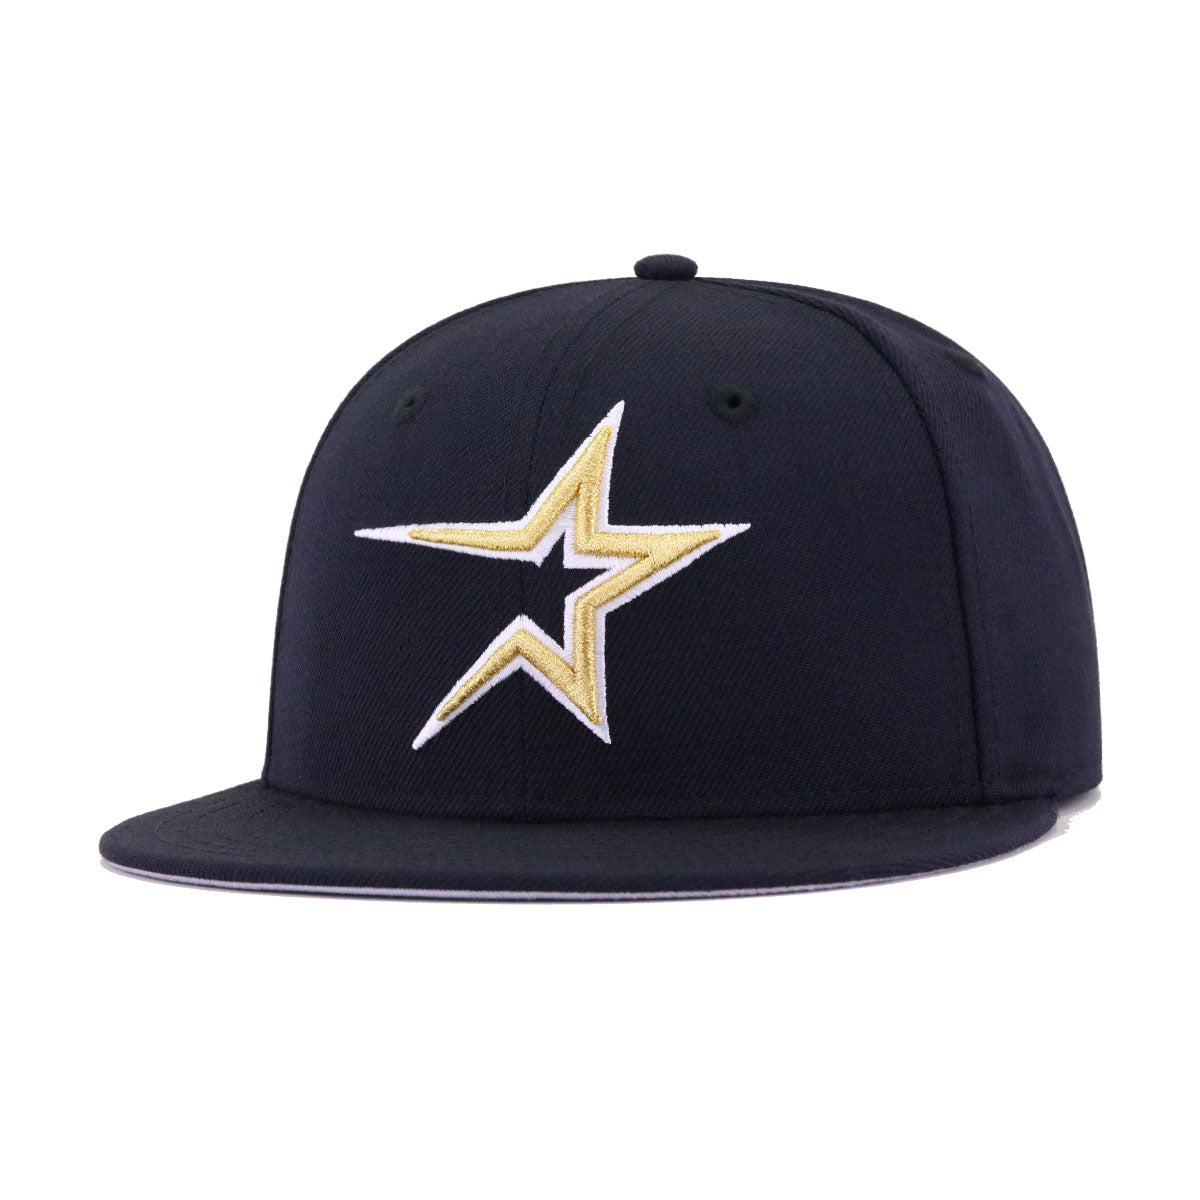 Houston Astros New Era Cooperstown Collection Camp 59FIFTY Fitted